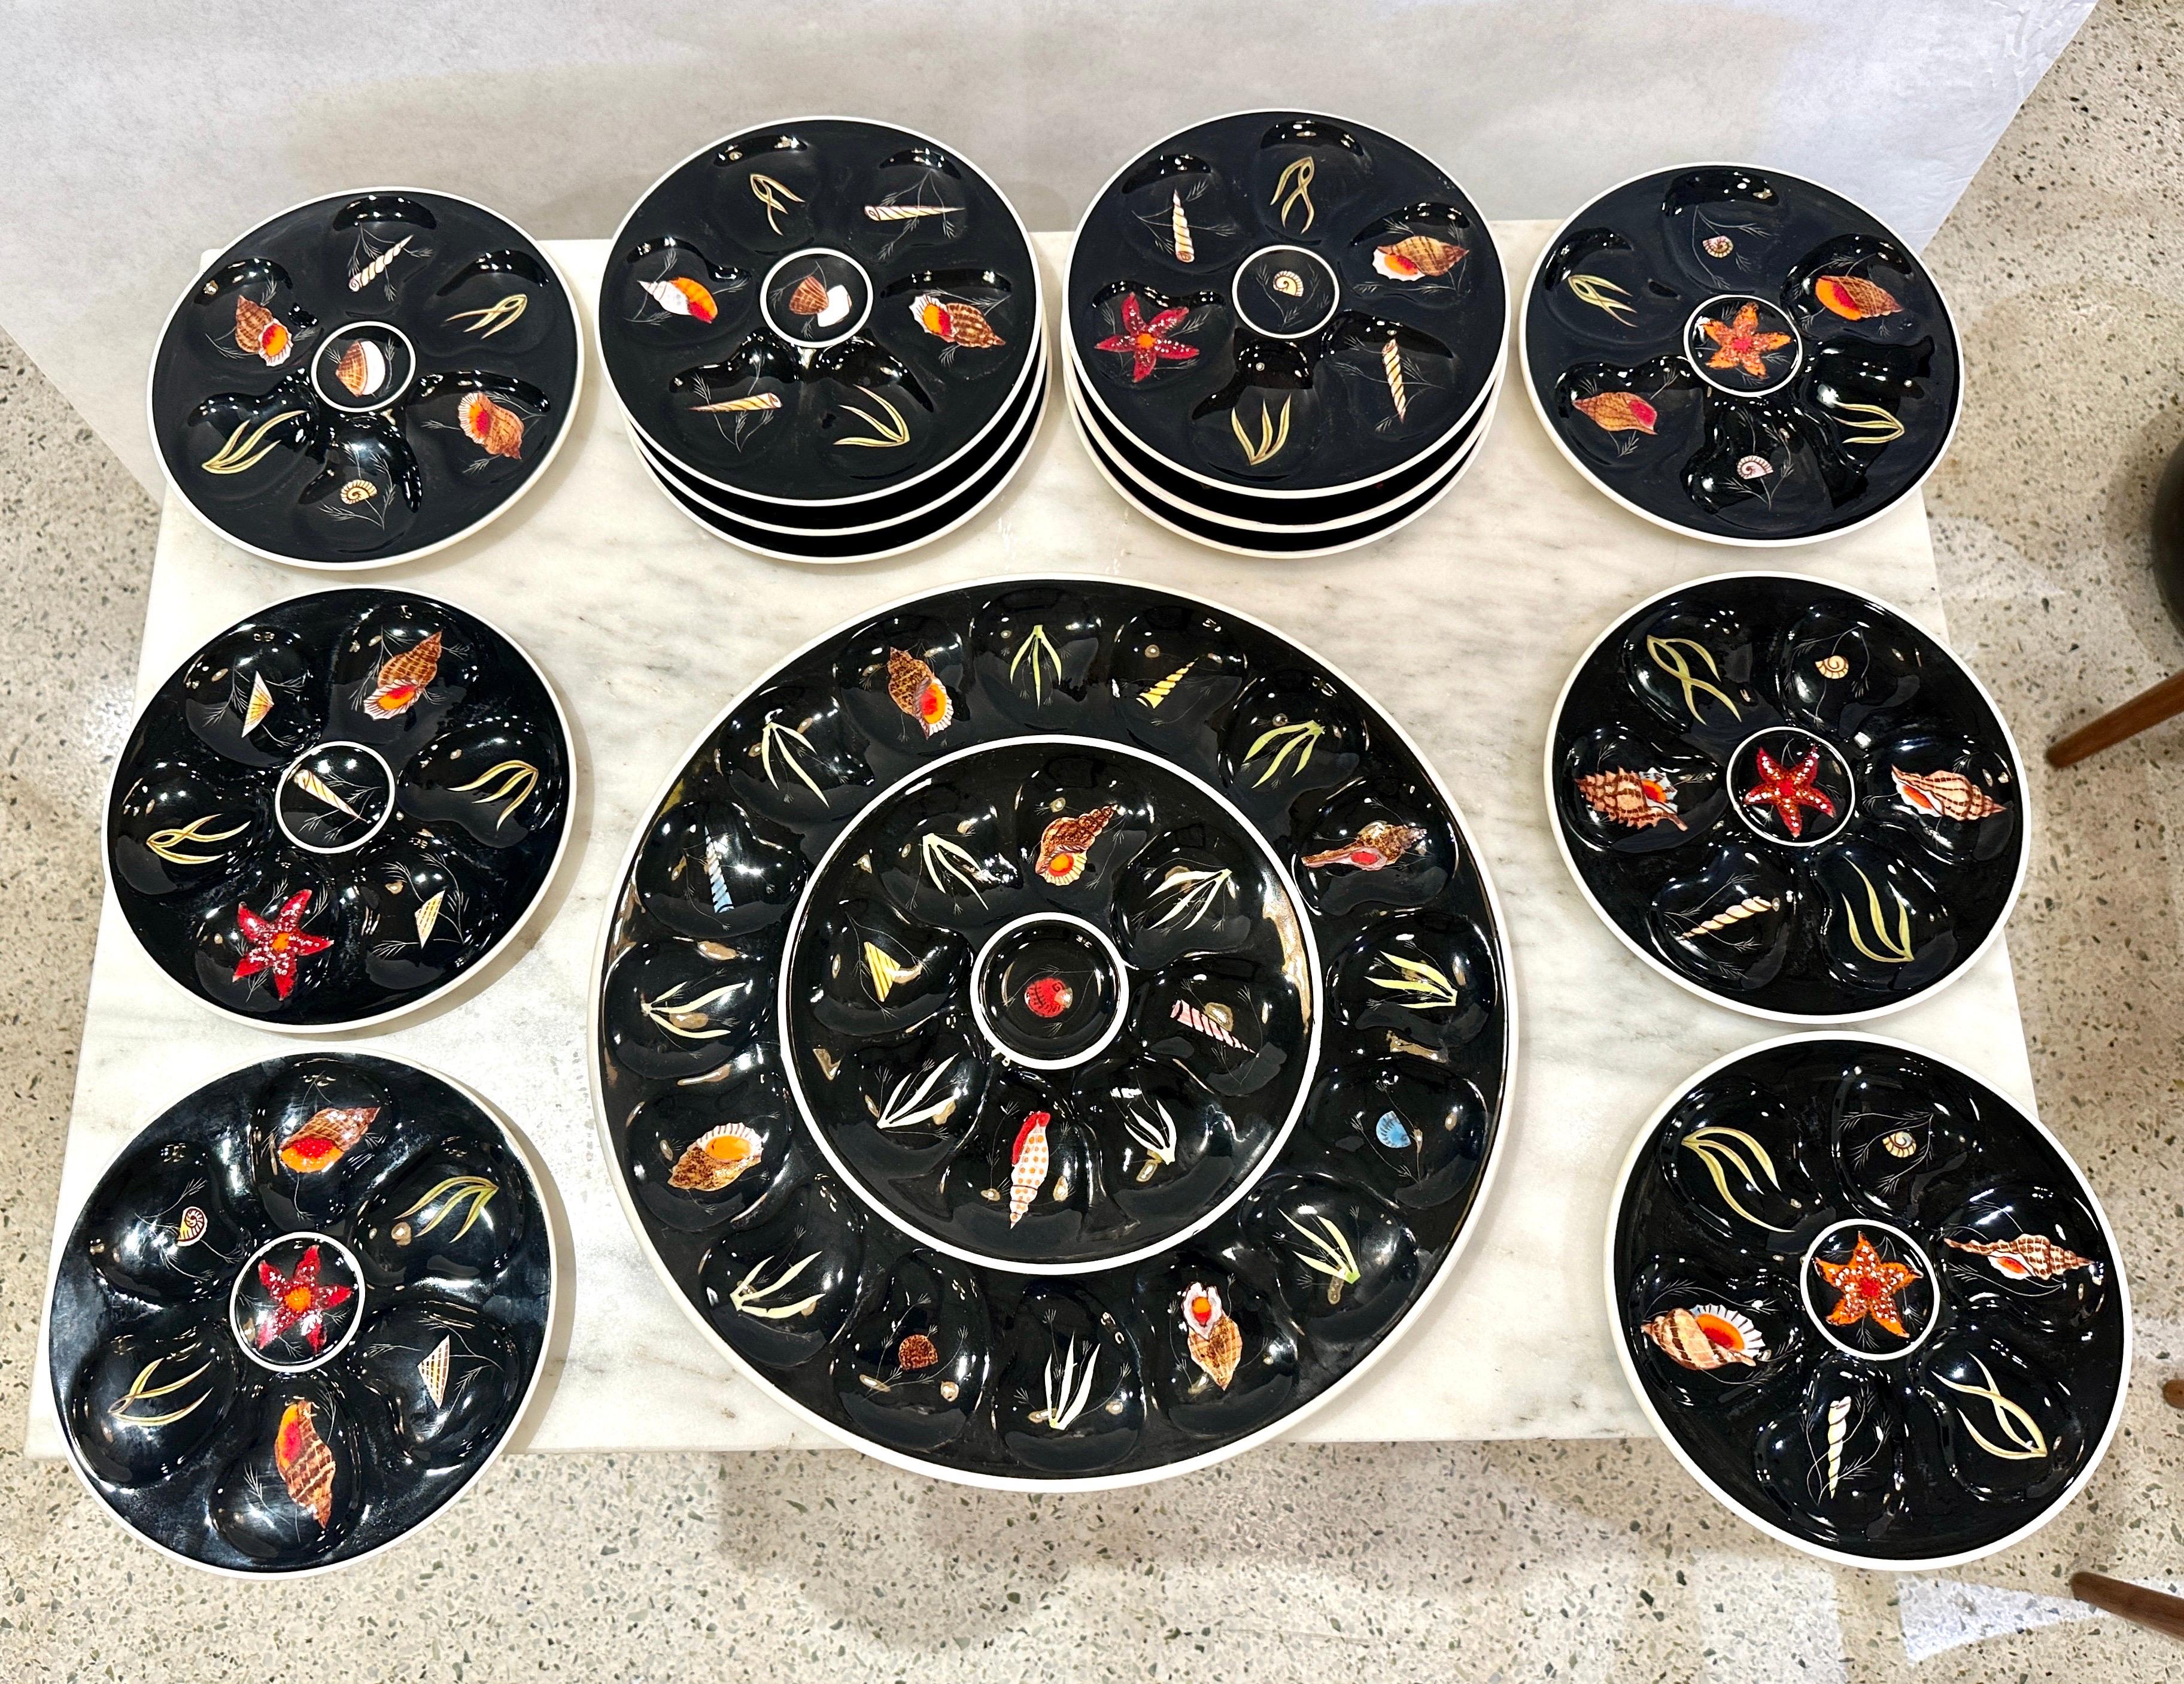 A RARE French Oyster Service Platter and 12 Plates by Henriot Quimper For Sale 3